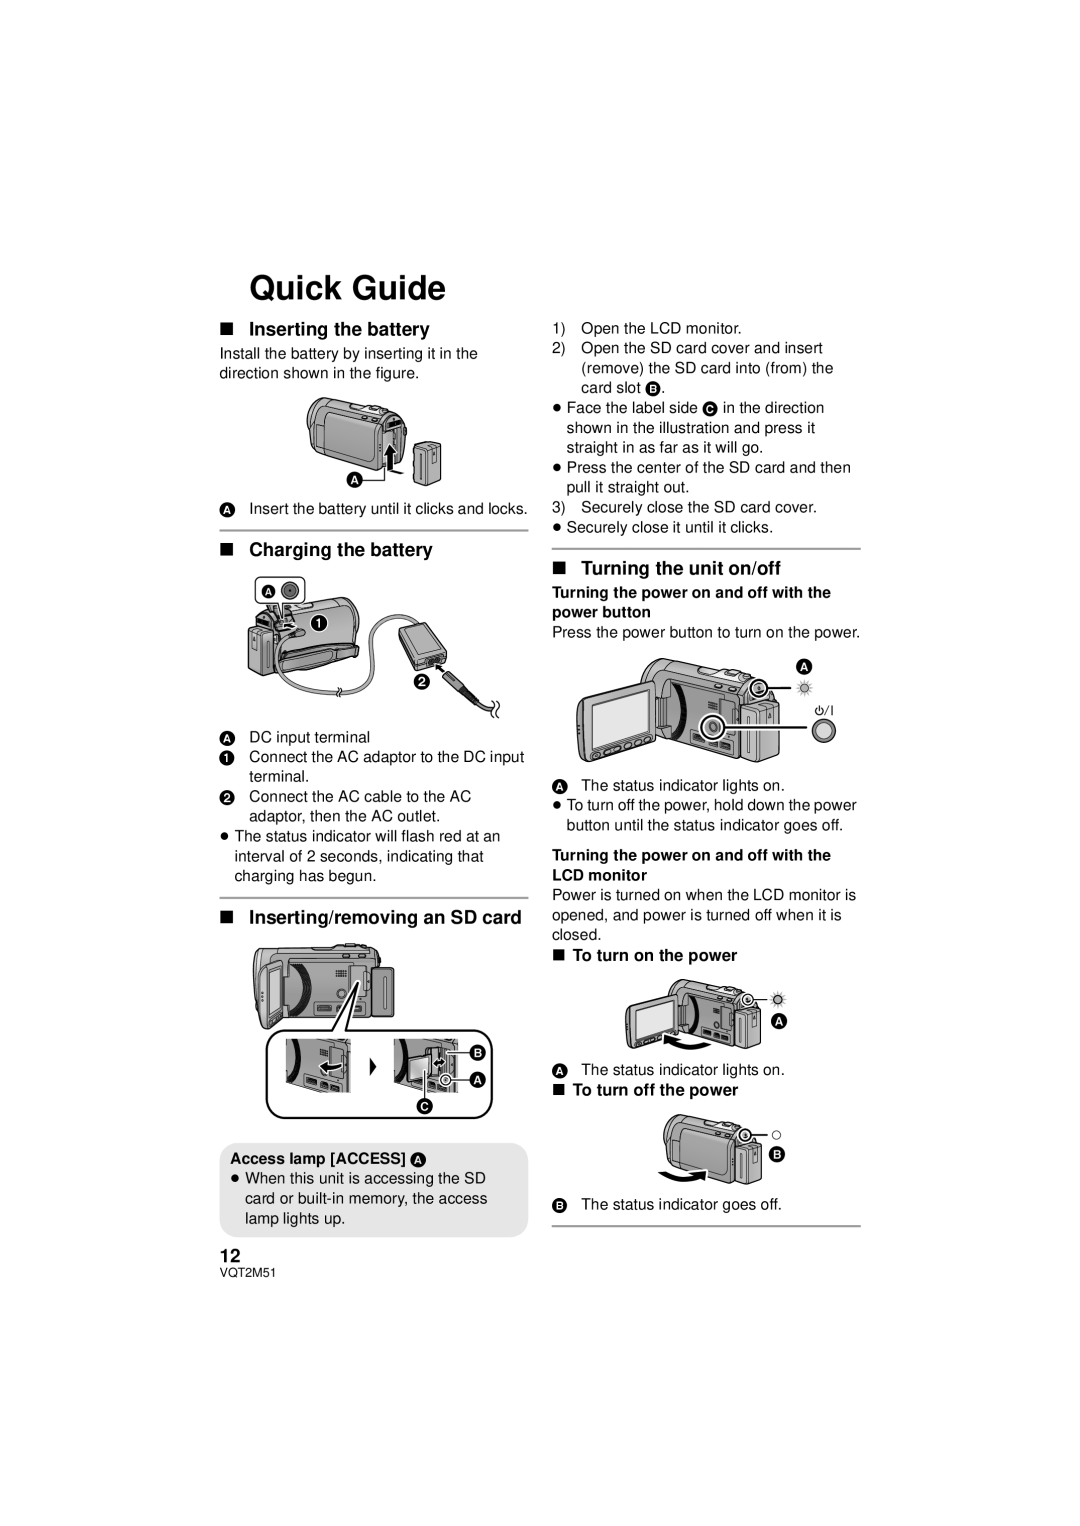 Panasonic HDC-SD60P/PC Quick Guide, Inserting the battery, ∫ Charging the battery, ∫ Inserting/removing an SD card 